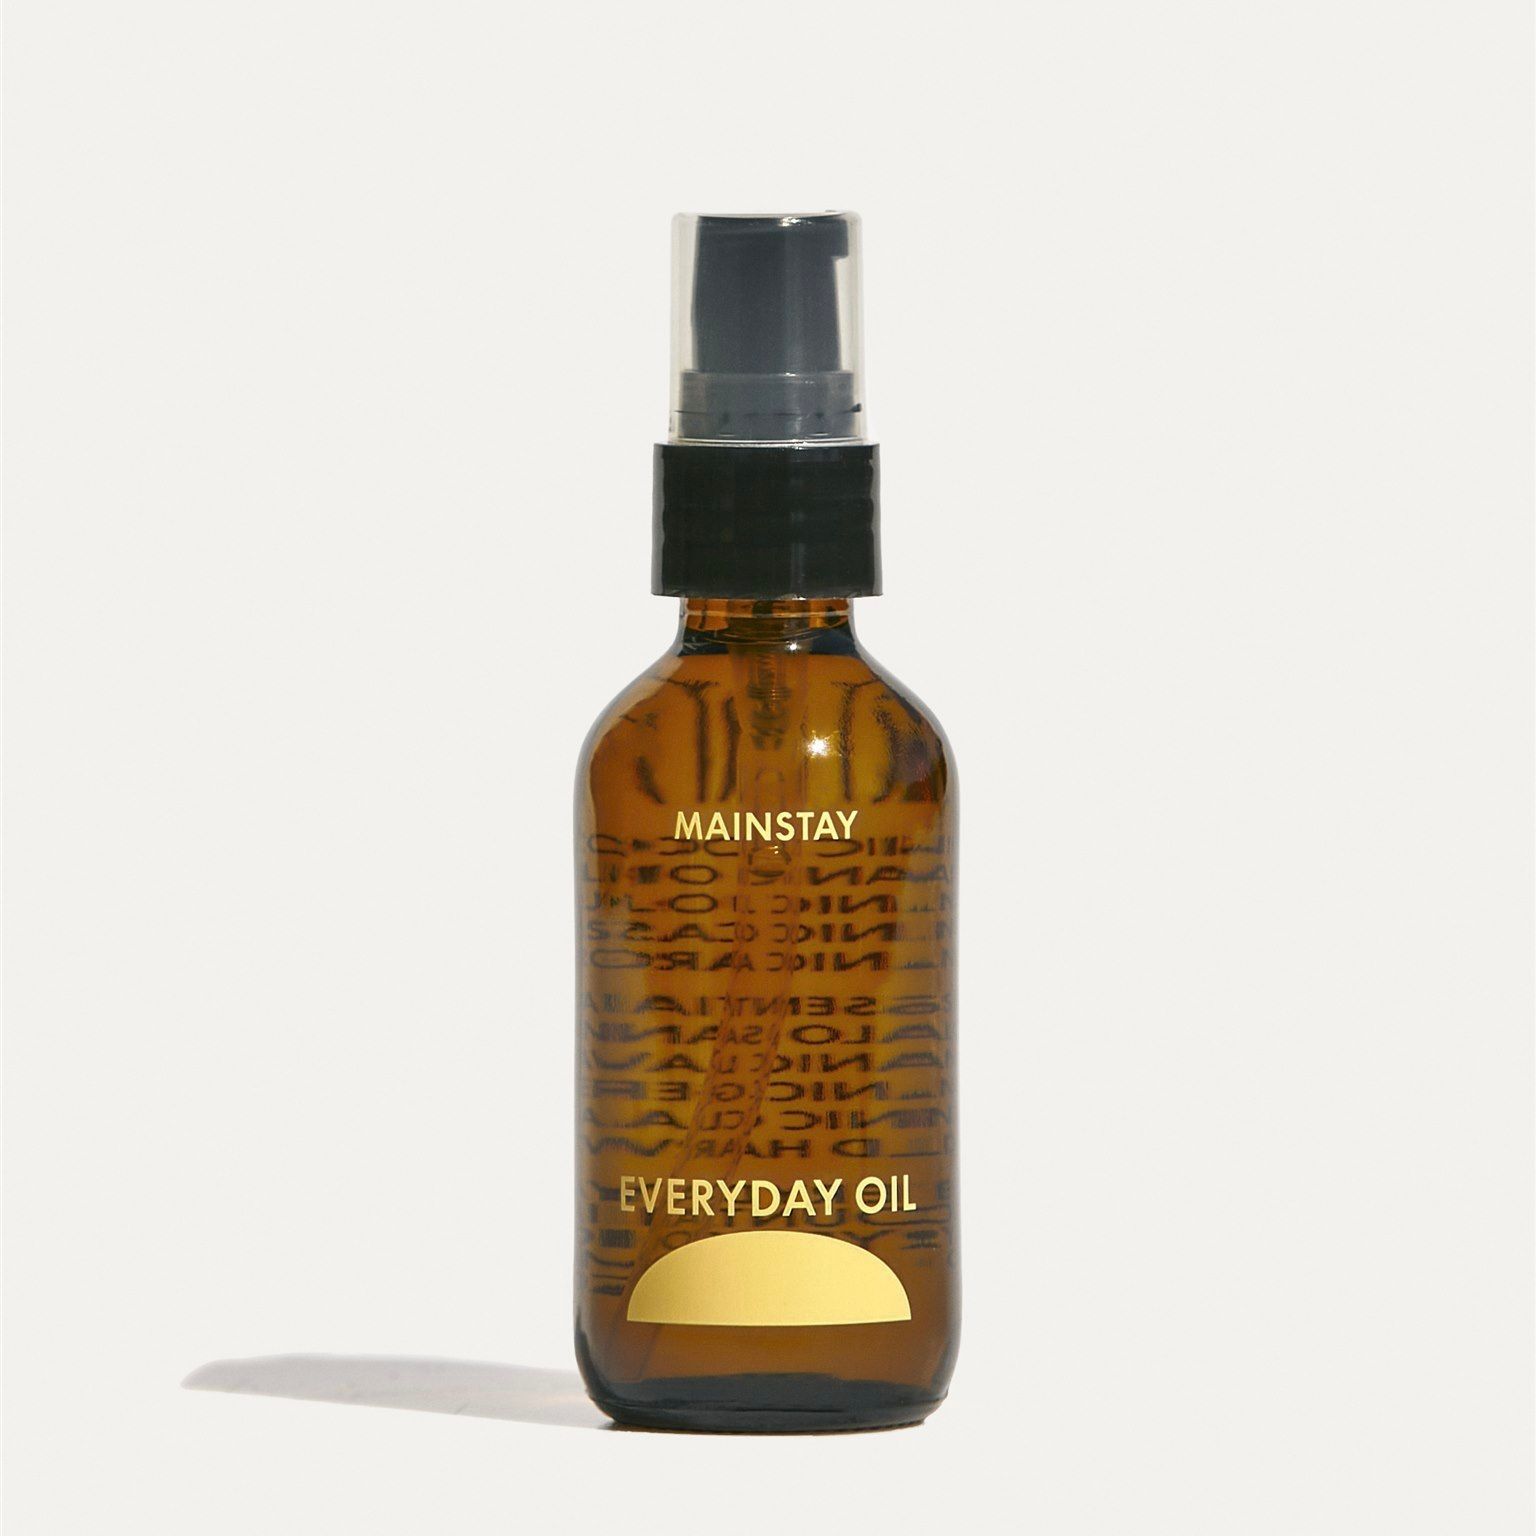 One small bottle of Everyday Oil